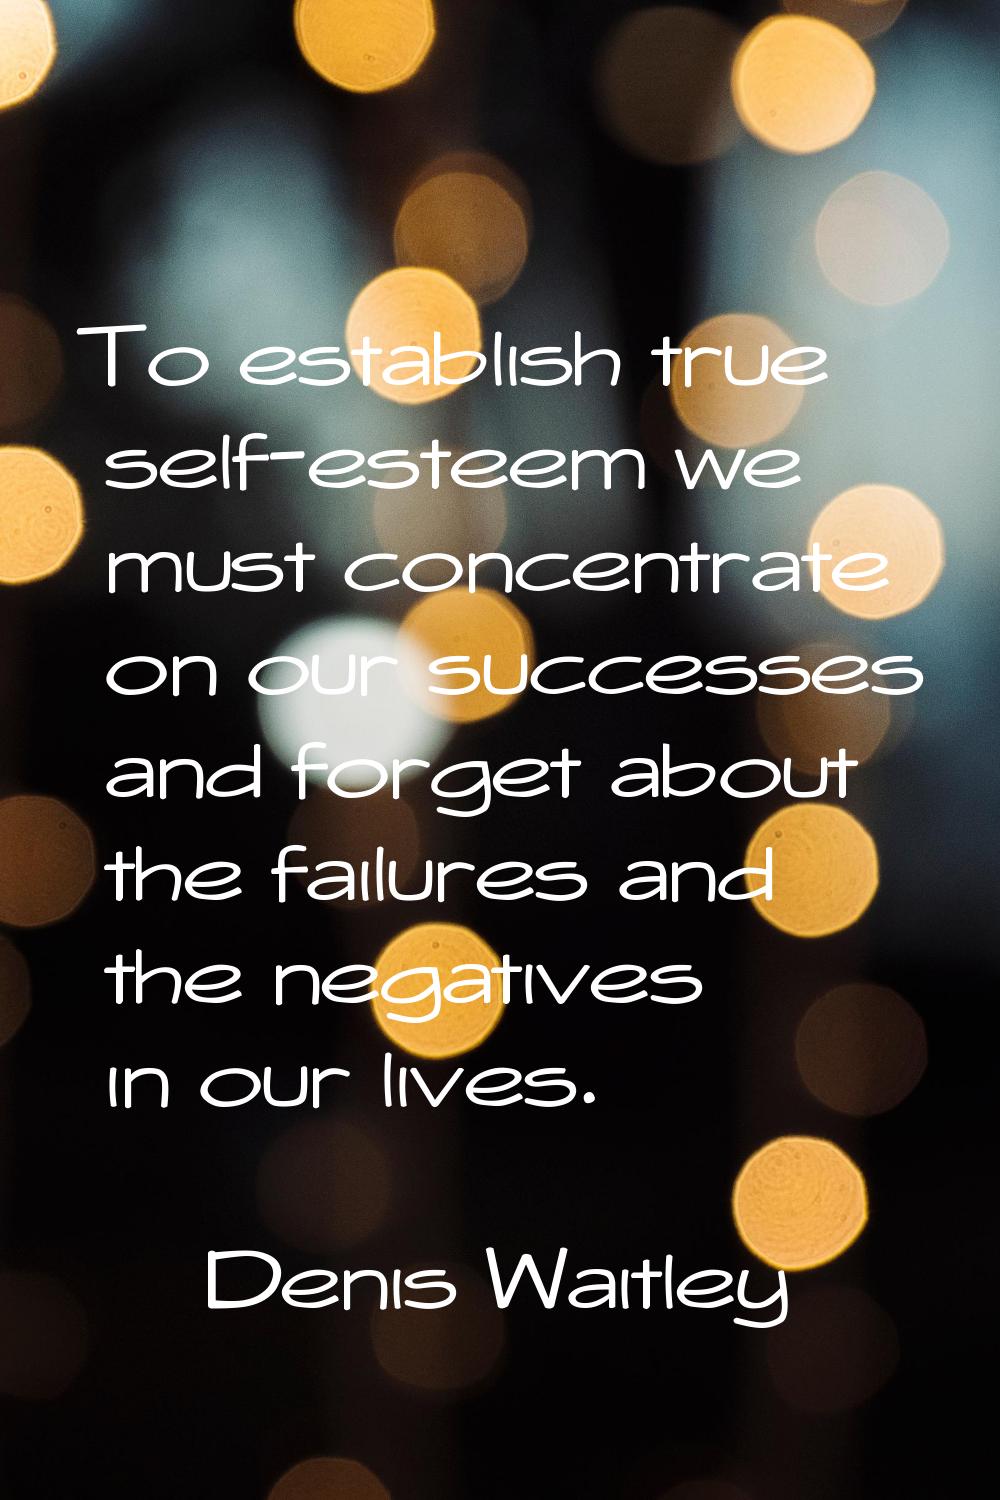 To establish true self-esteem we must concentrate on our successes and forget about the failures an